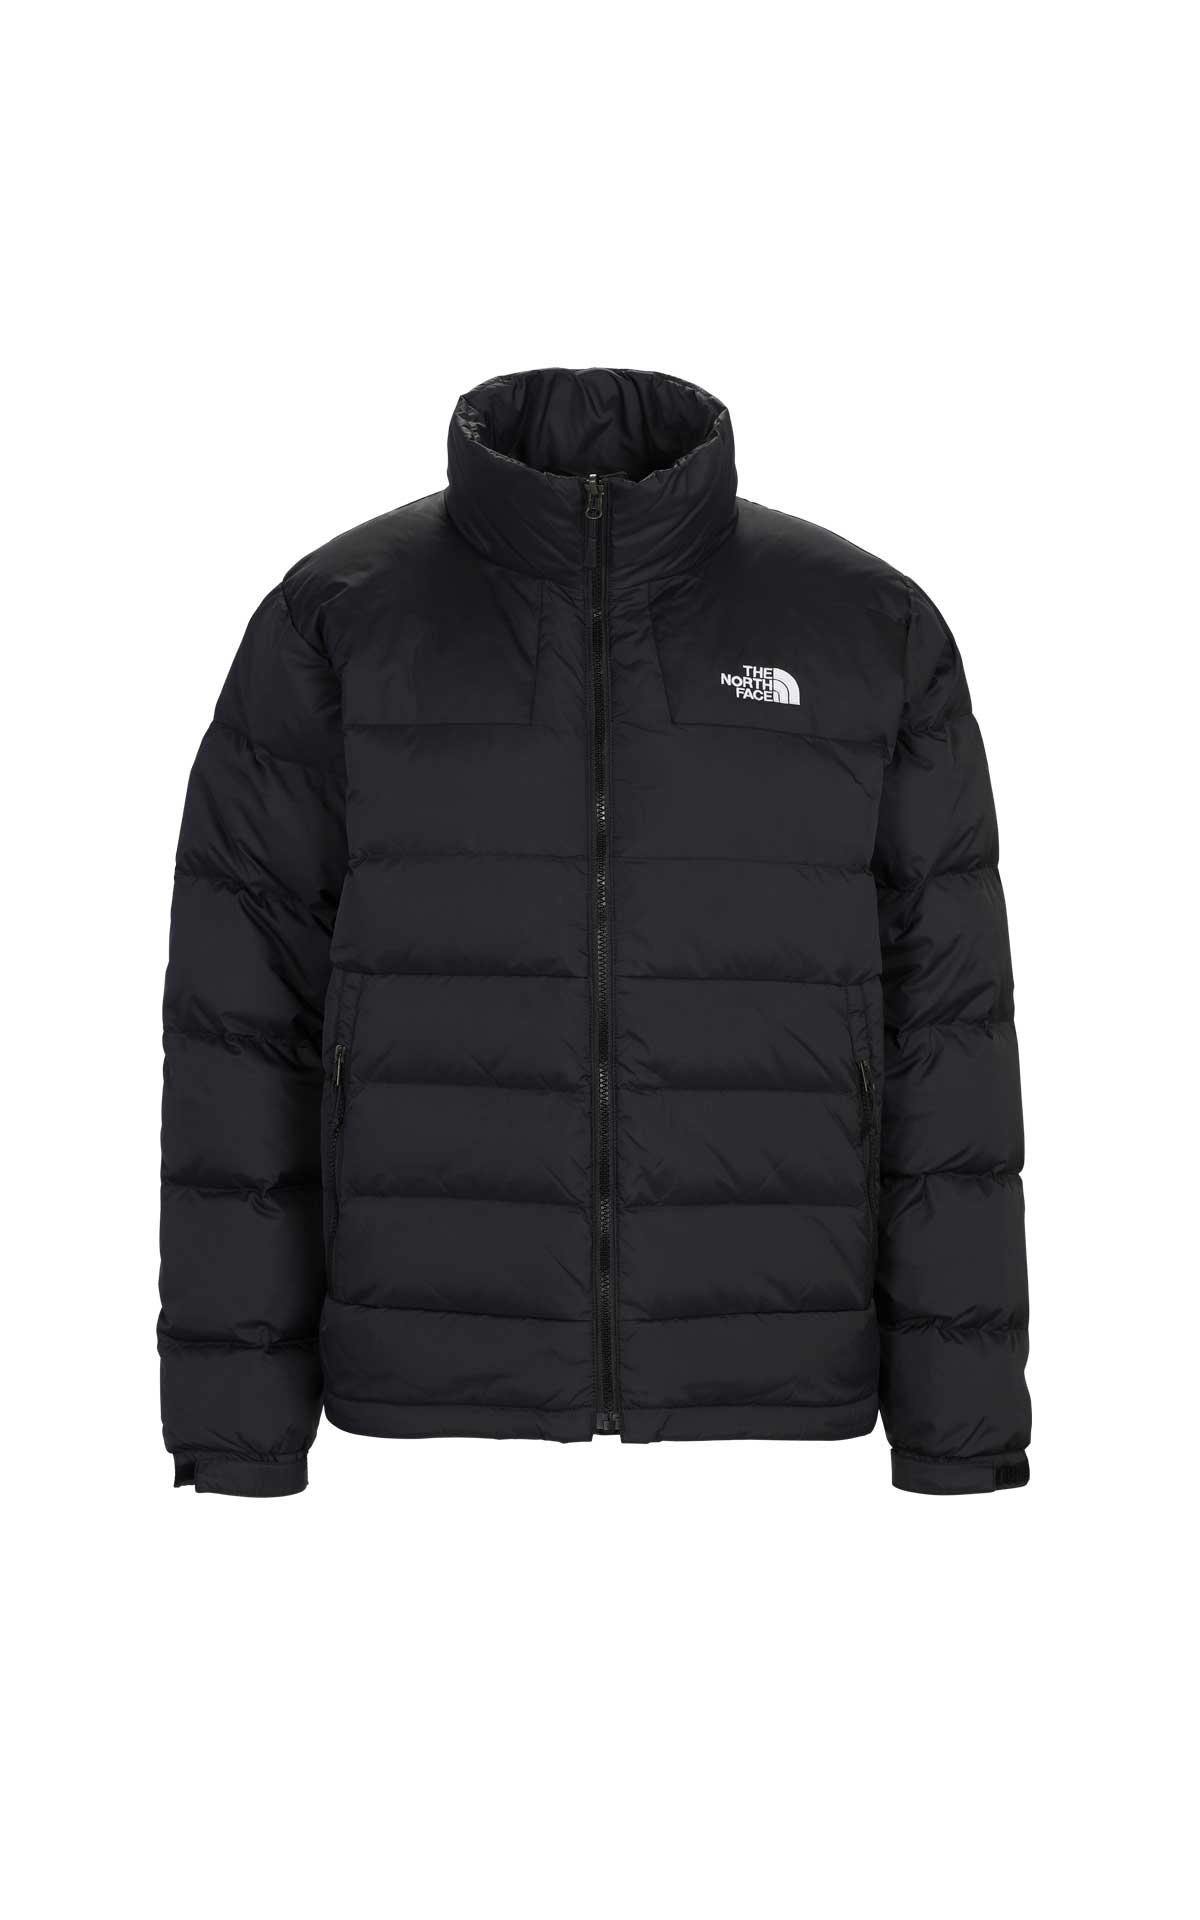 Black anorak the north face